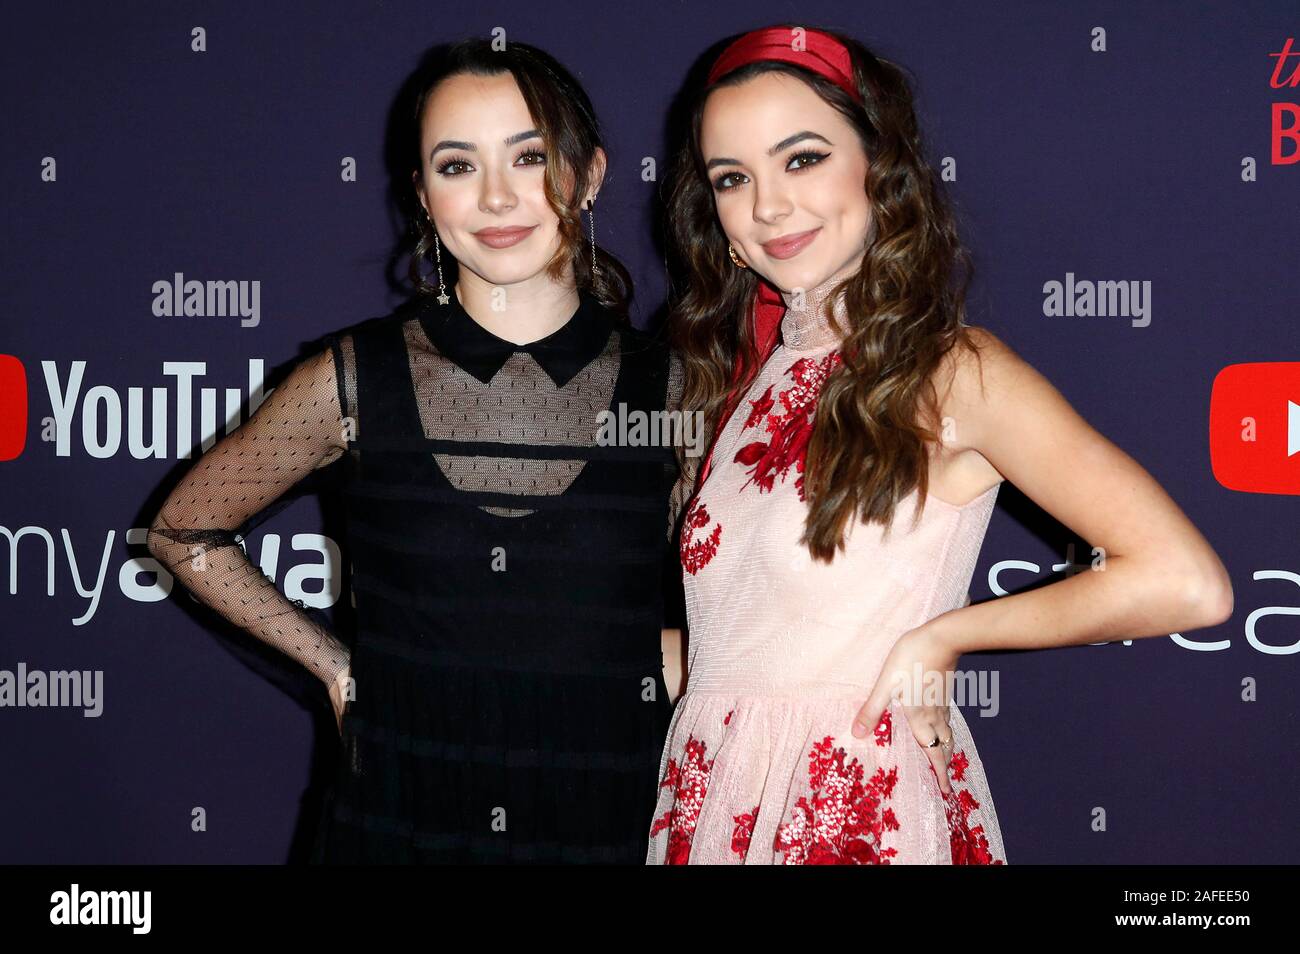 Beverly Hills, USA. 13th Dec, 2019. Veronica Merrell and Vanessa Merrell (Merrell  Twins) at the 9th Streamy Awards 2019 ceremony at the Beverly Hilton Hotel.  Beverly Hills, 12/13/2019 | usage worldwide Credit: